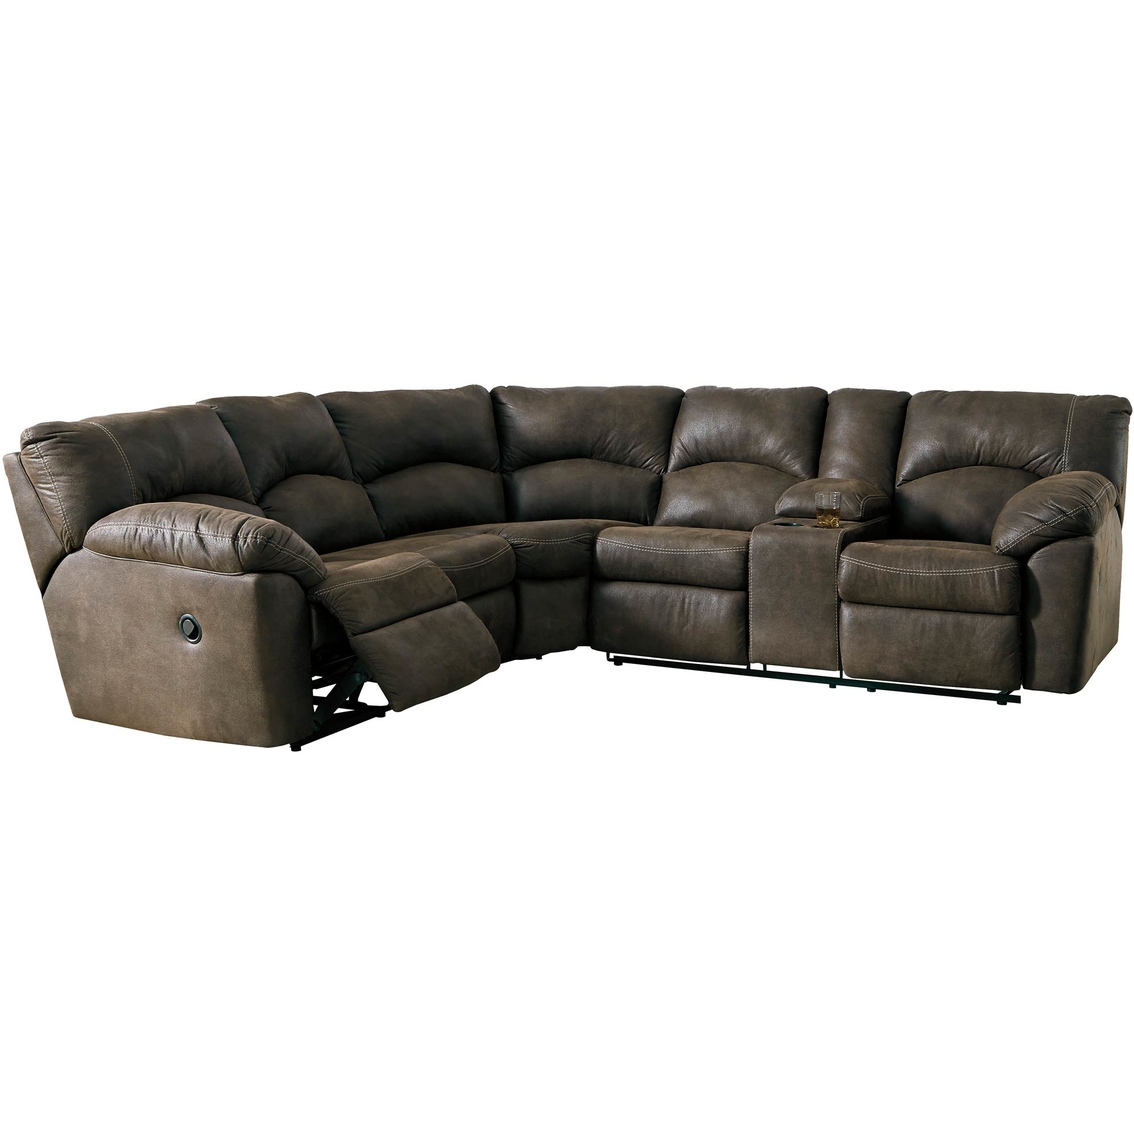 Signature Design By Ashley Tambo Reclining Sectional Sofas